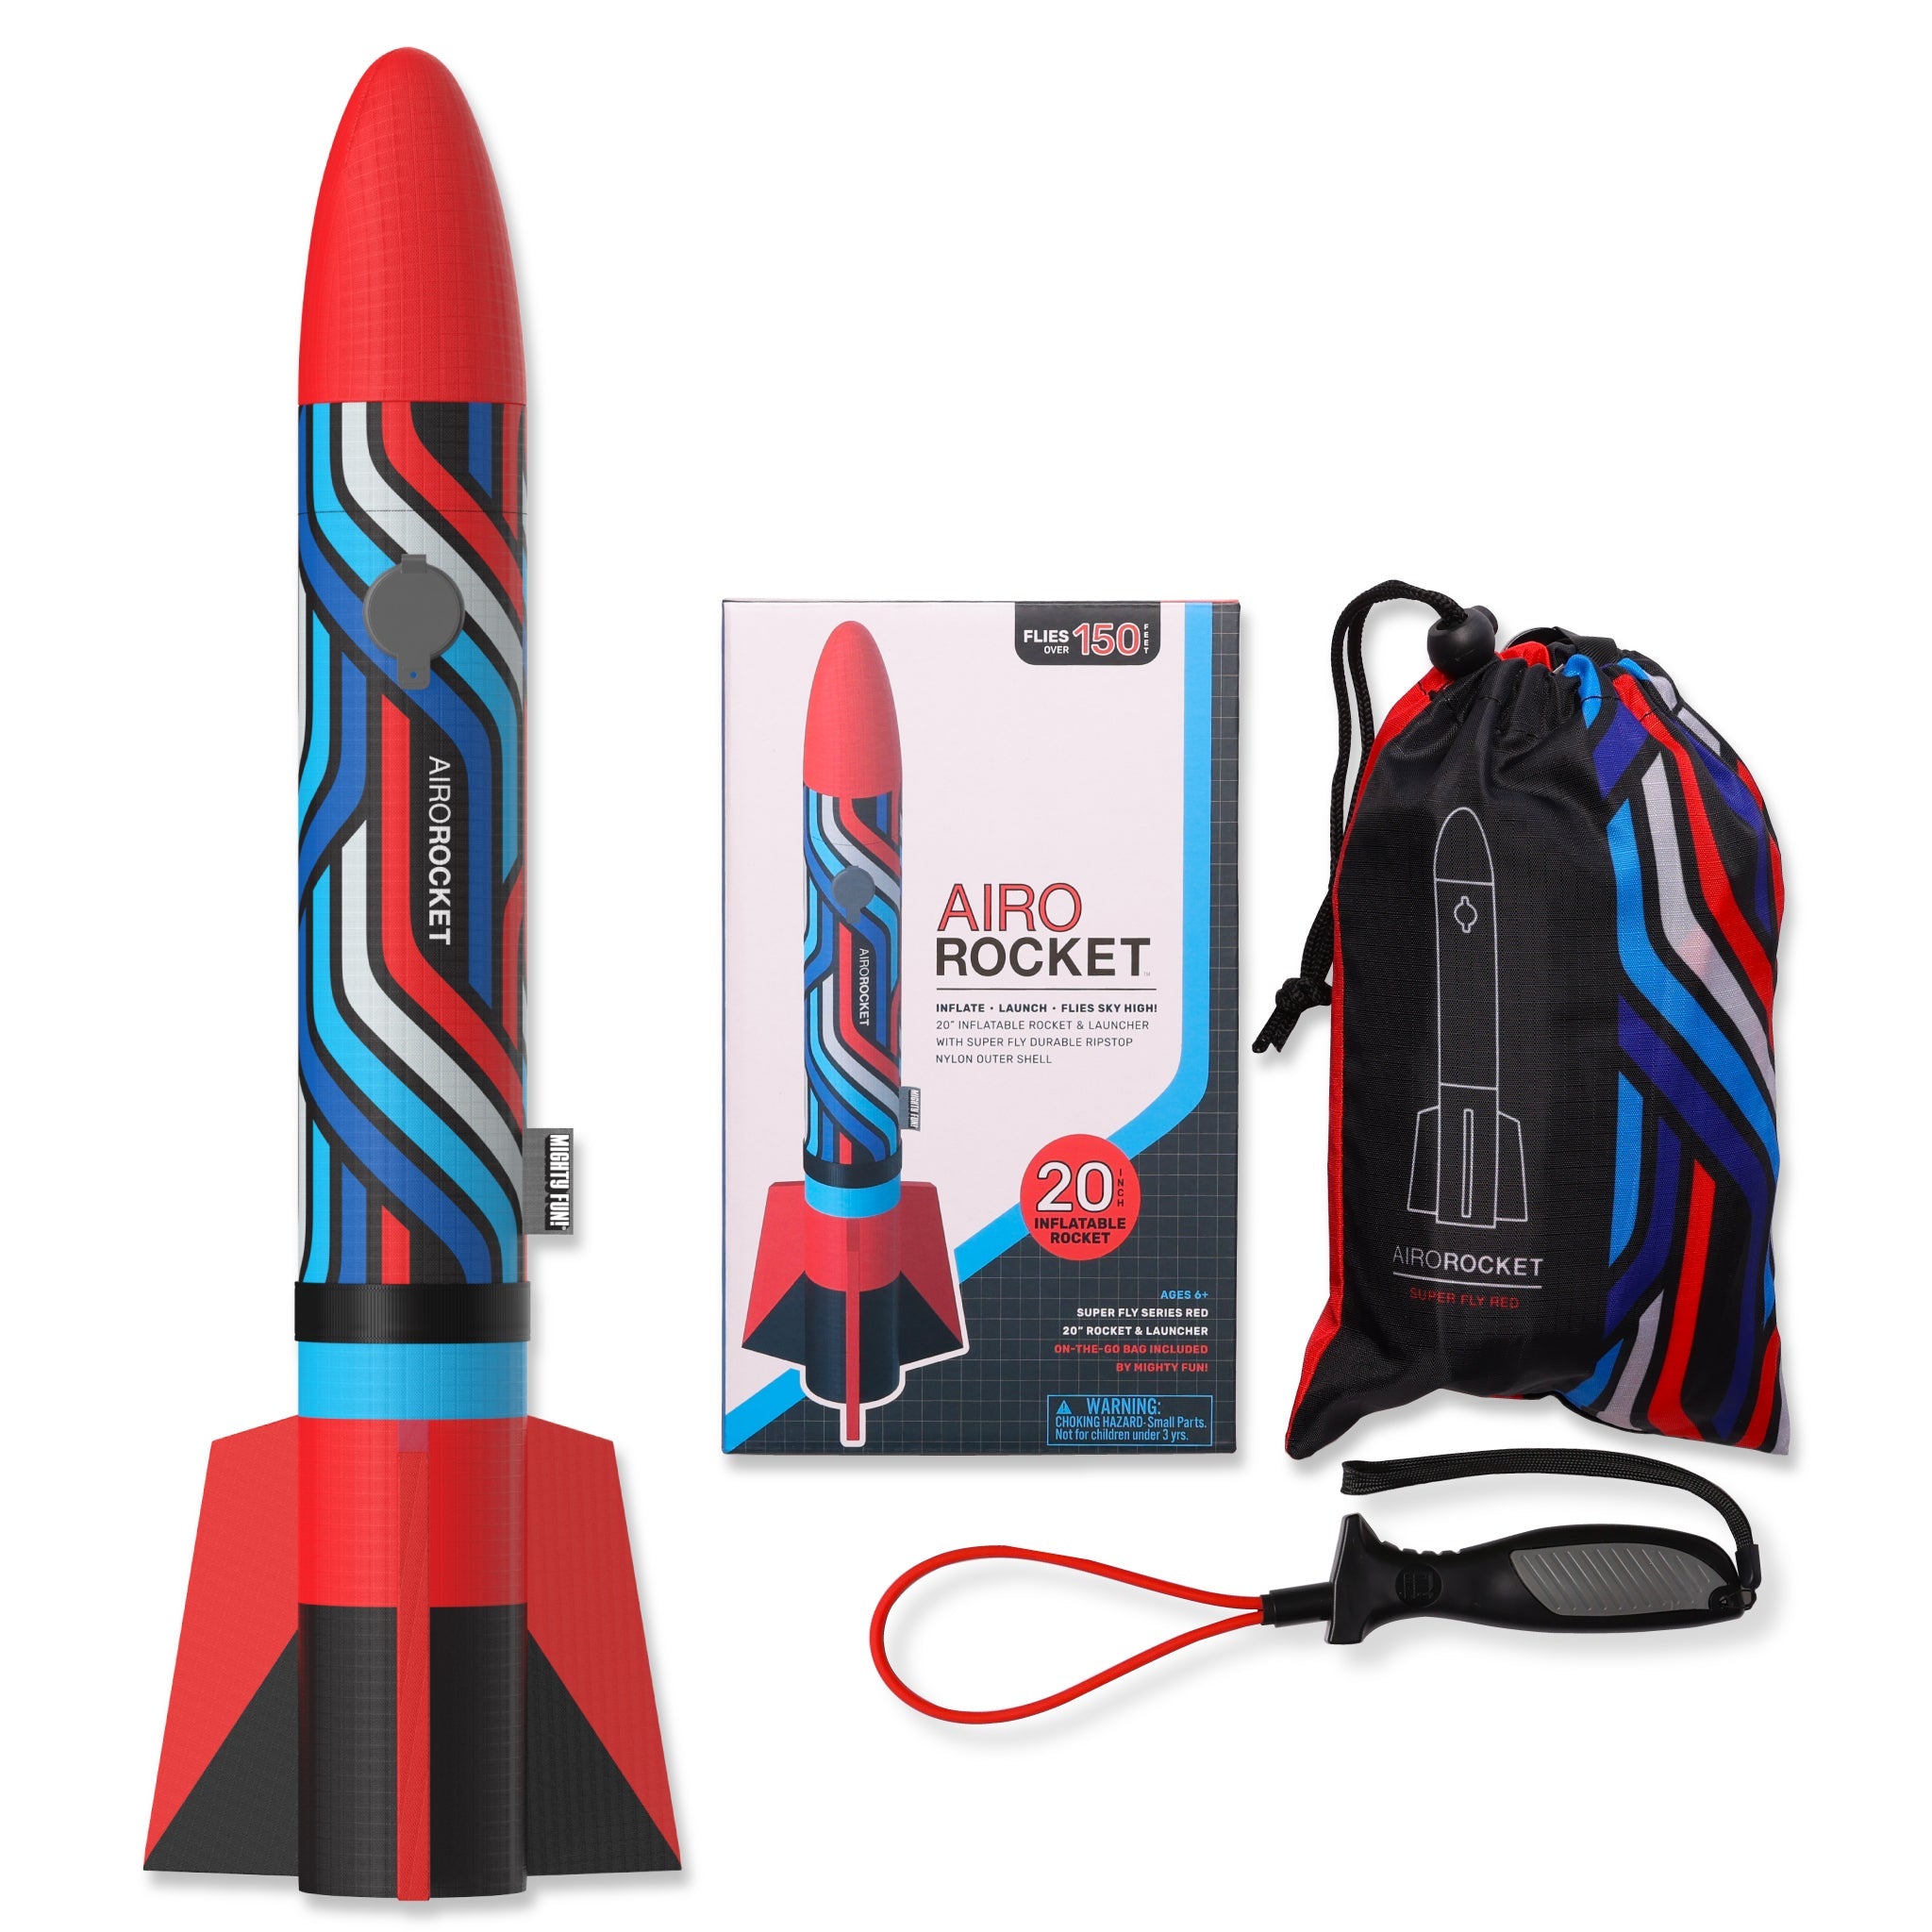 Red Airo Rocket toy rocket with hand launcher, storage bag, and color box by Mighty Fun!